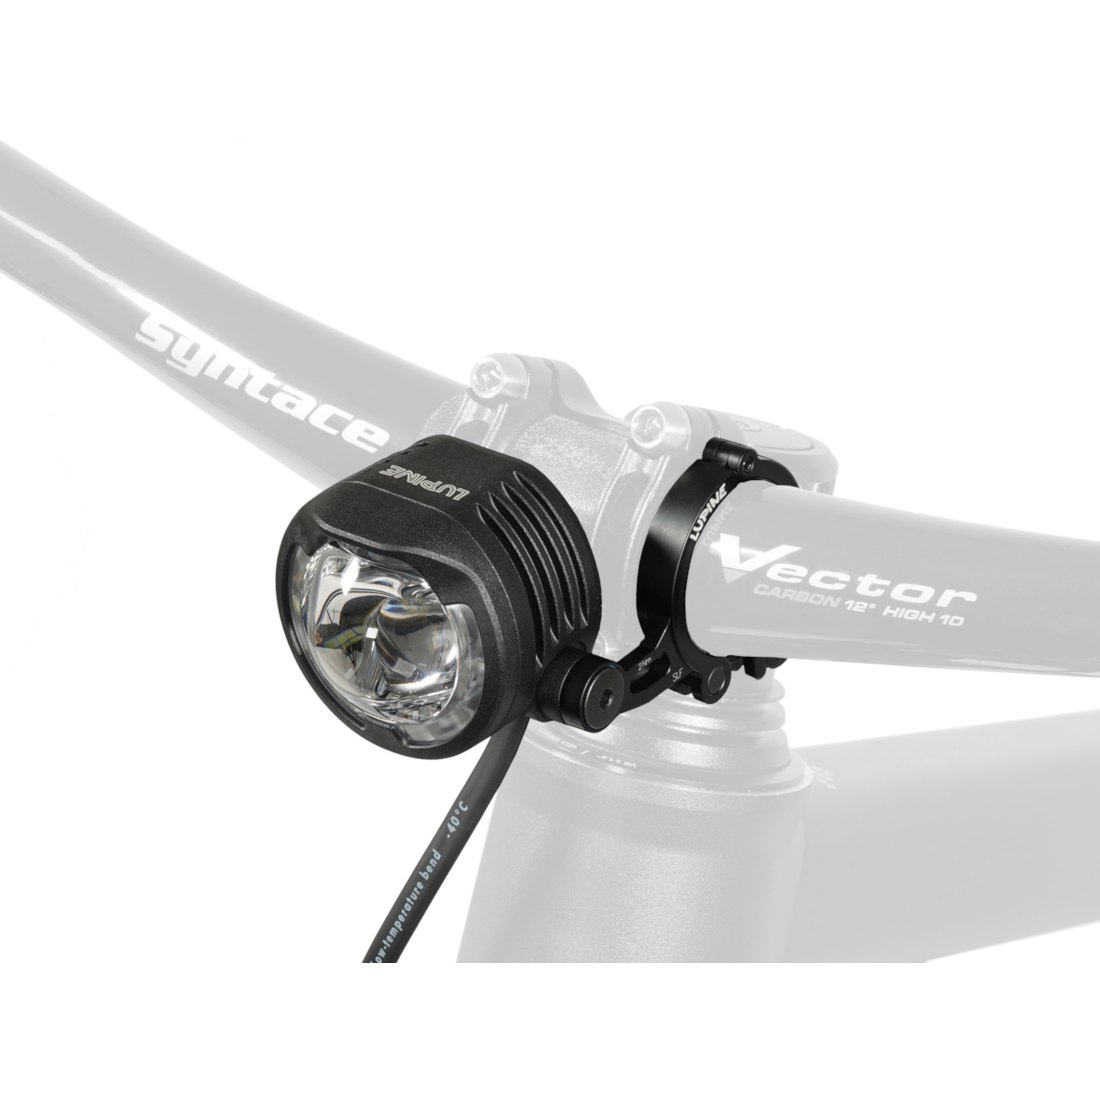 Picture of Lupine SL AF Lamp Head with Remote and Handlebar Mount - black